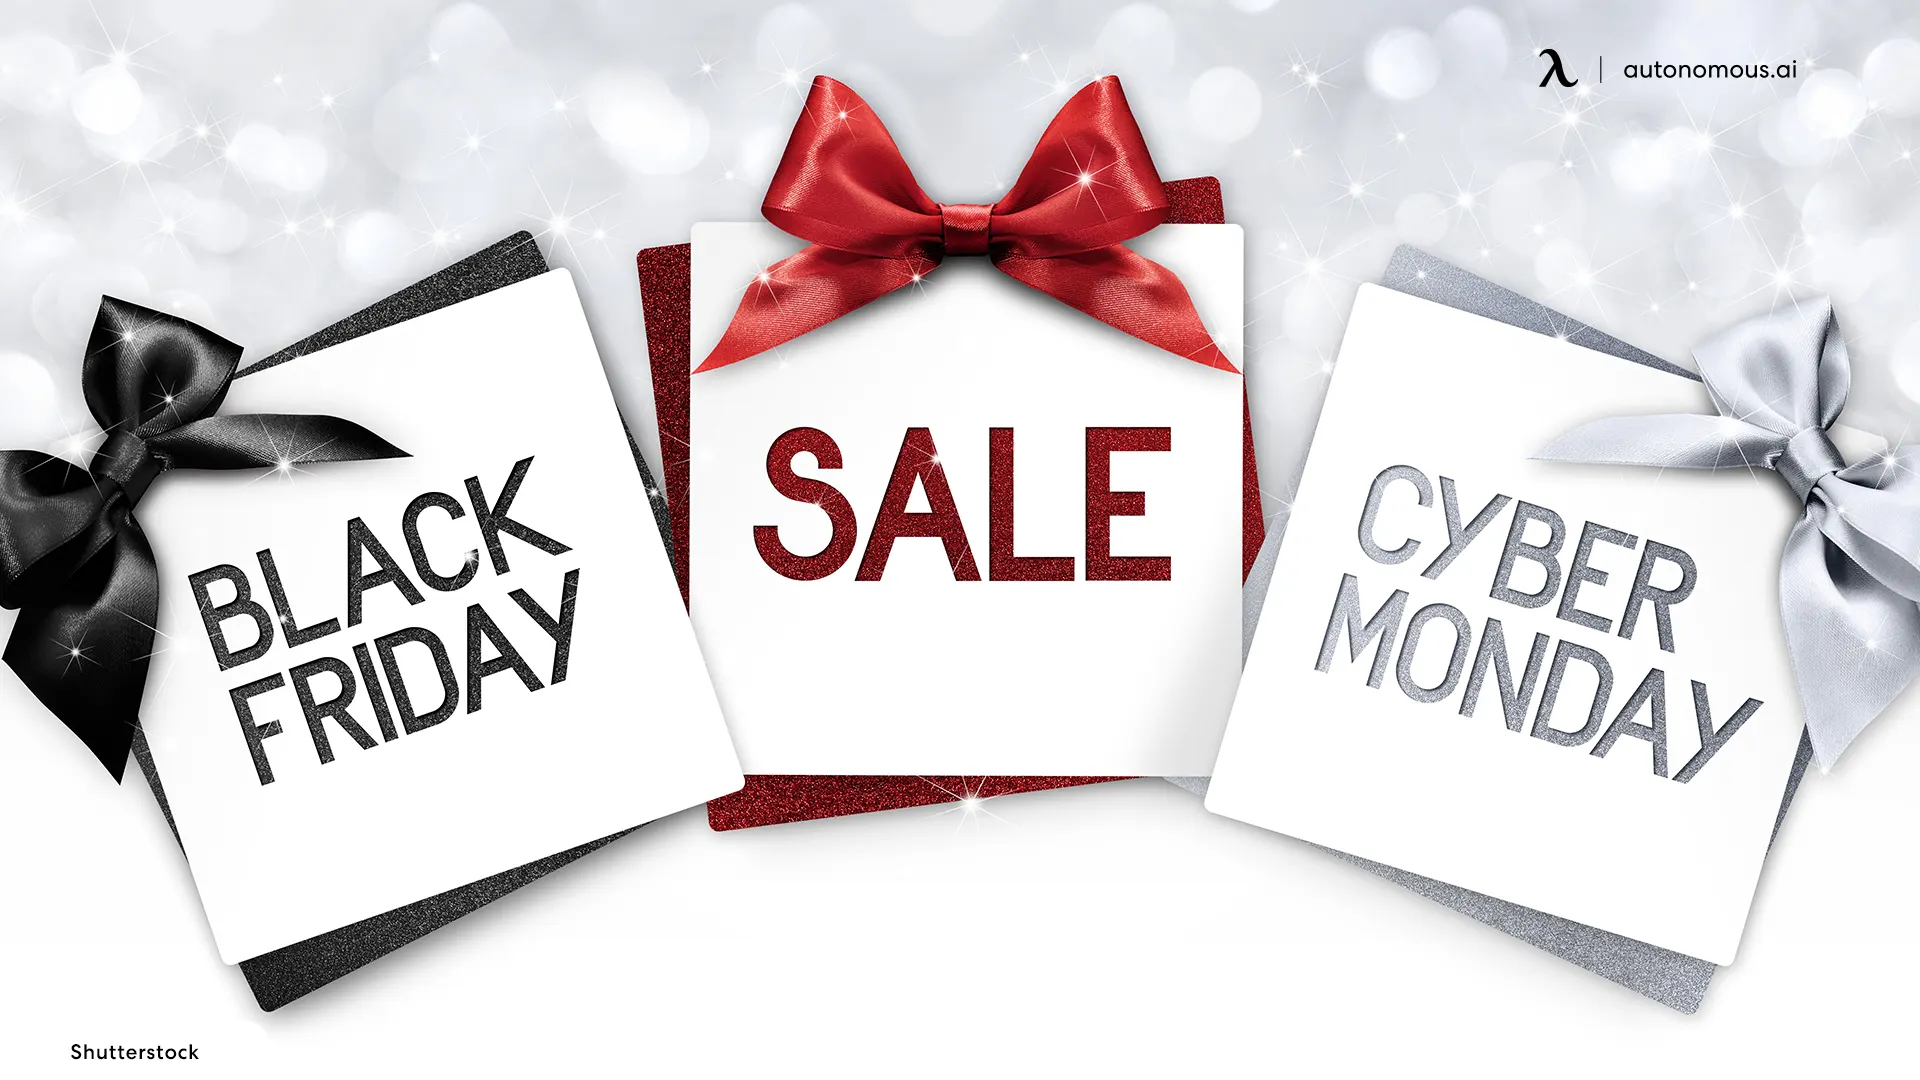 Is It Better To Buy a Camera on Black Friday or Cyber Monday?